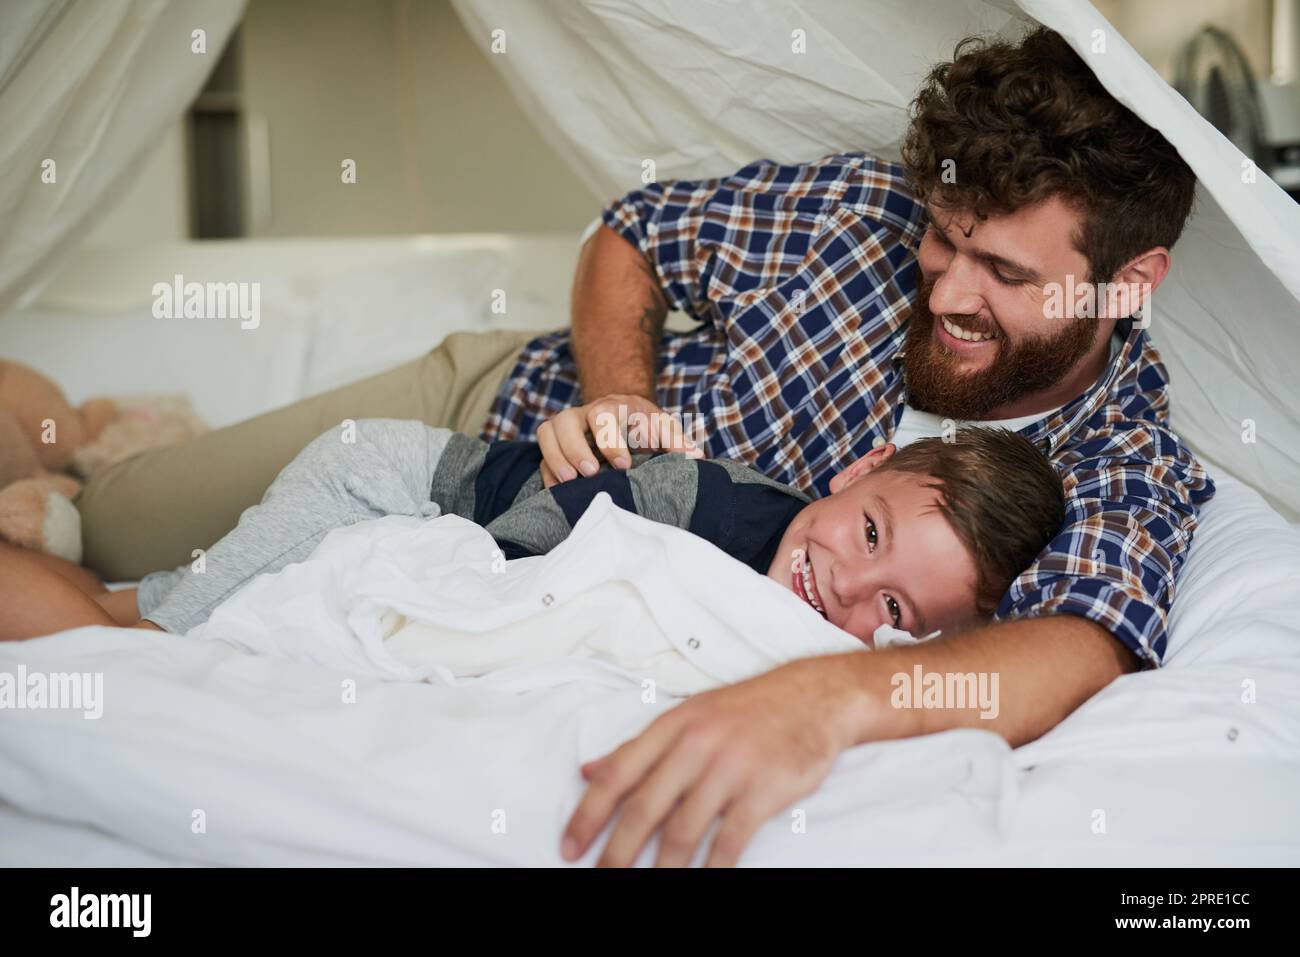 My favourite place to rest. Cropped portrait of an adorable little boy lying on the bed at home with his dad. Stock Photo